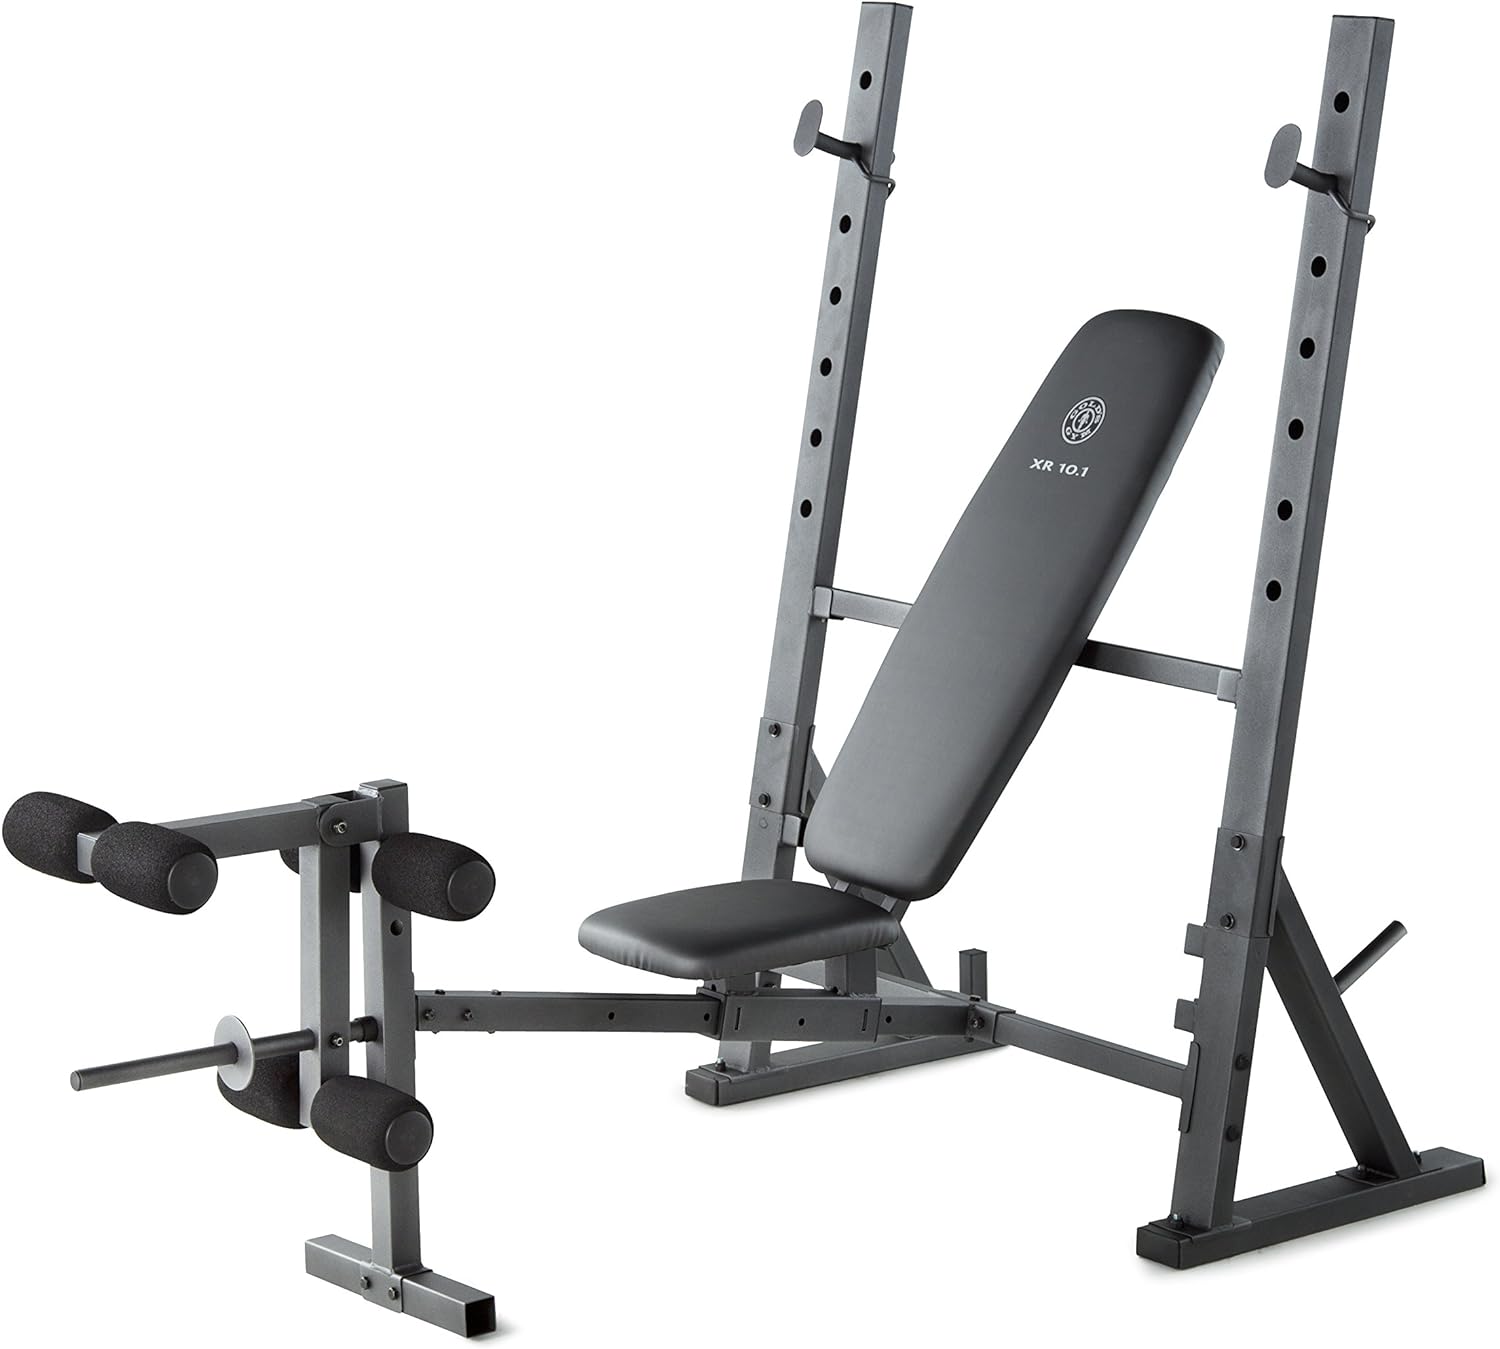 The Golds Gym XR 10.0 Adjustable Weight Bench